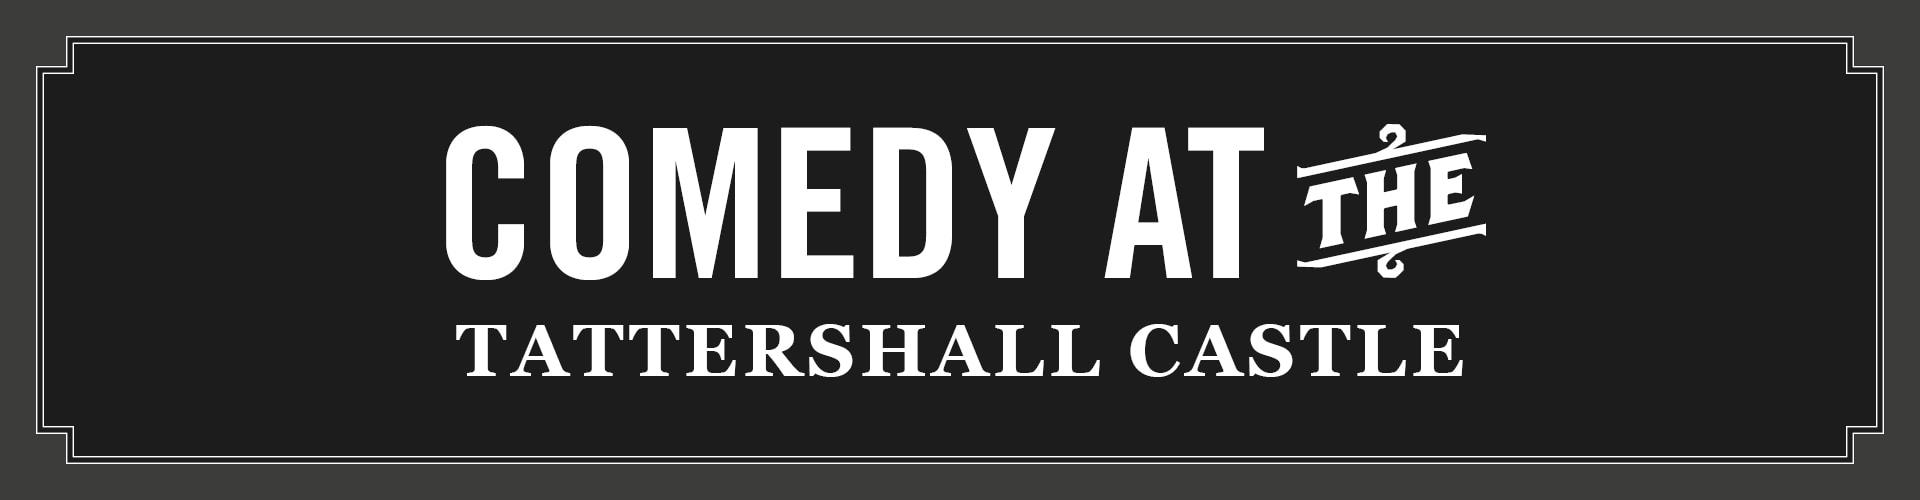 Comedy at The Tattershall Castle | Comedy Events in London